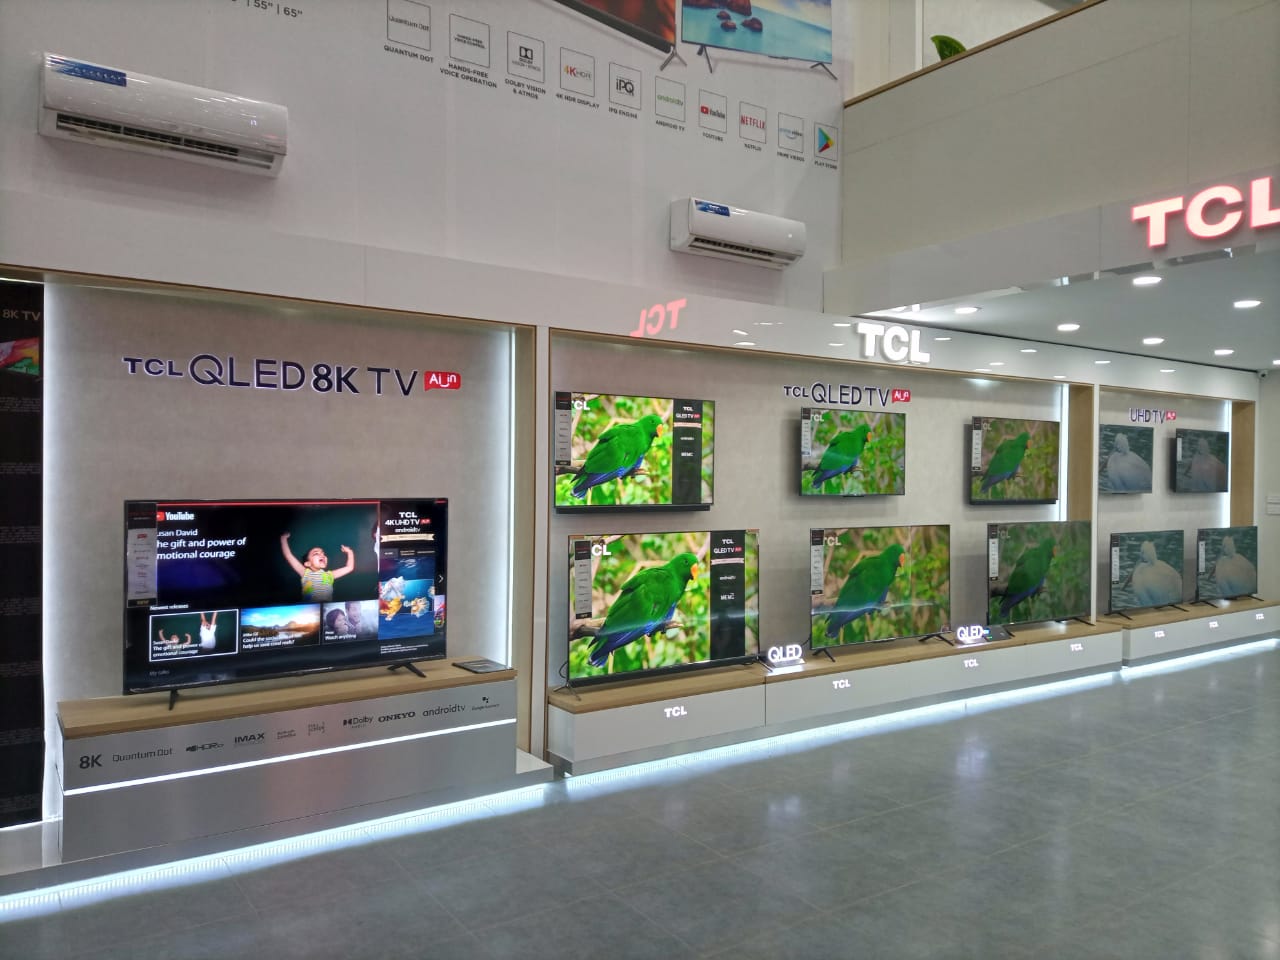  TCL Pakistan Opens its Second Flagship Store in Karachi